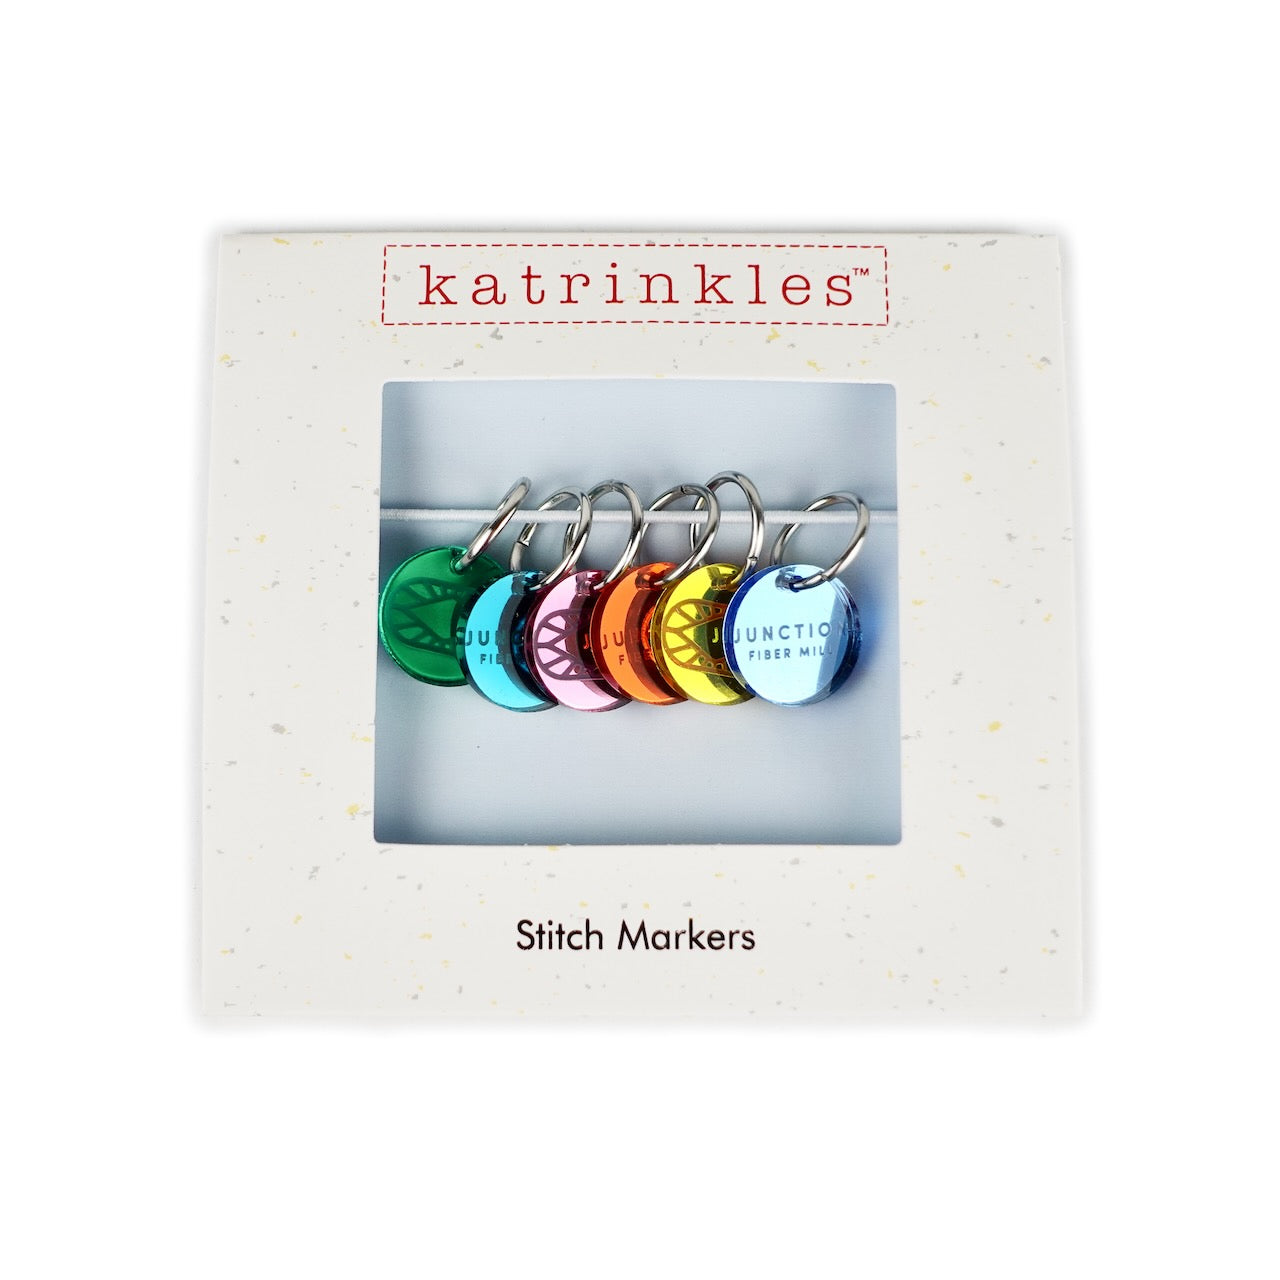 Stitch Markers · Junction Fiber Mill